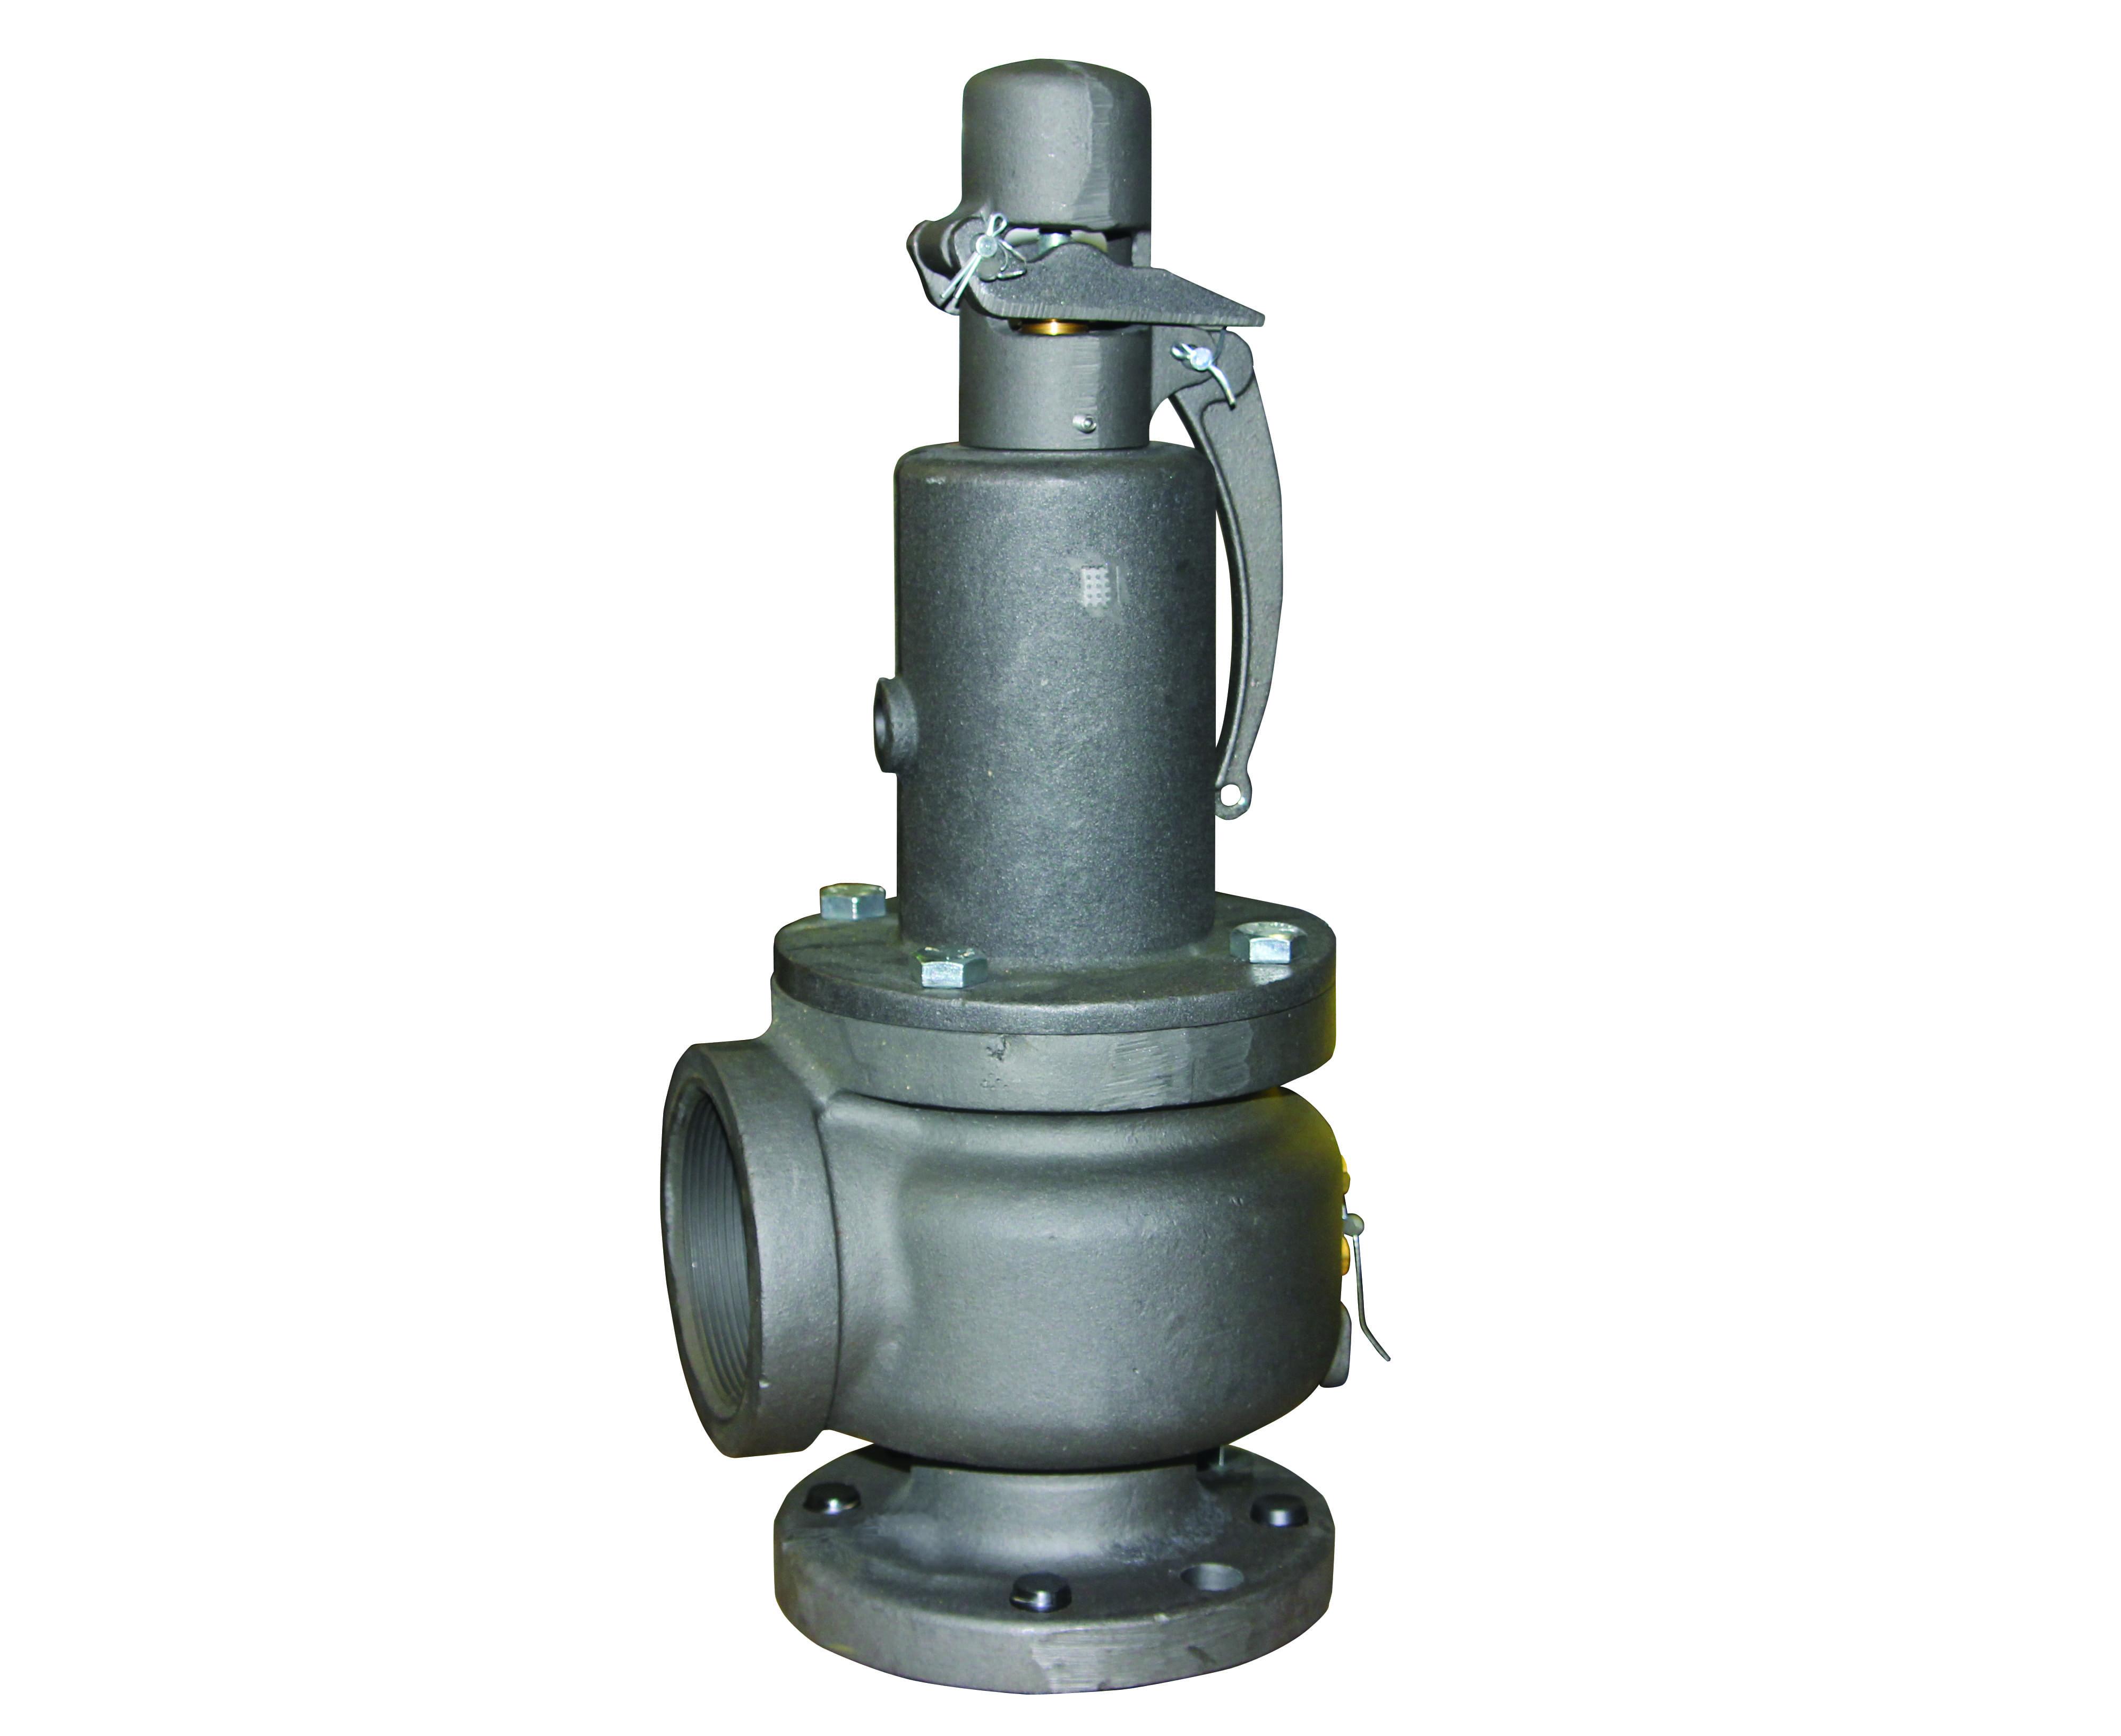 Preview image for Apollo ASME Section I Steam Cast Iron Safety Relief Valve, 2" x 3" (2 x FNPT)